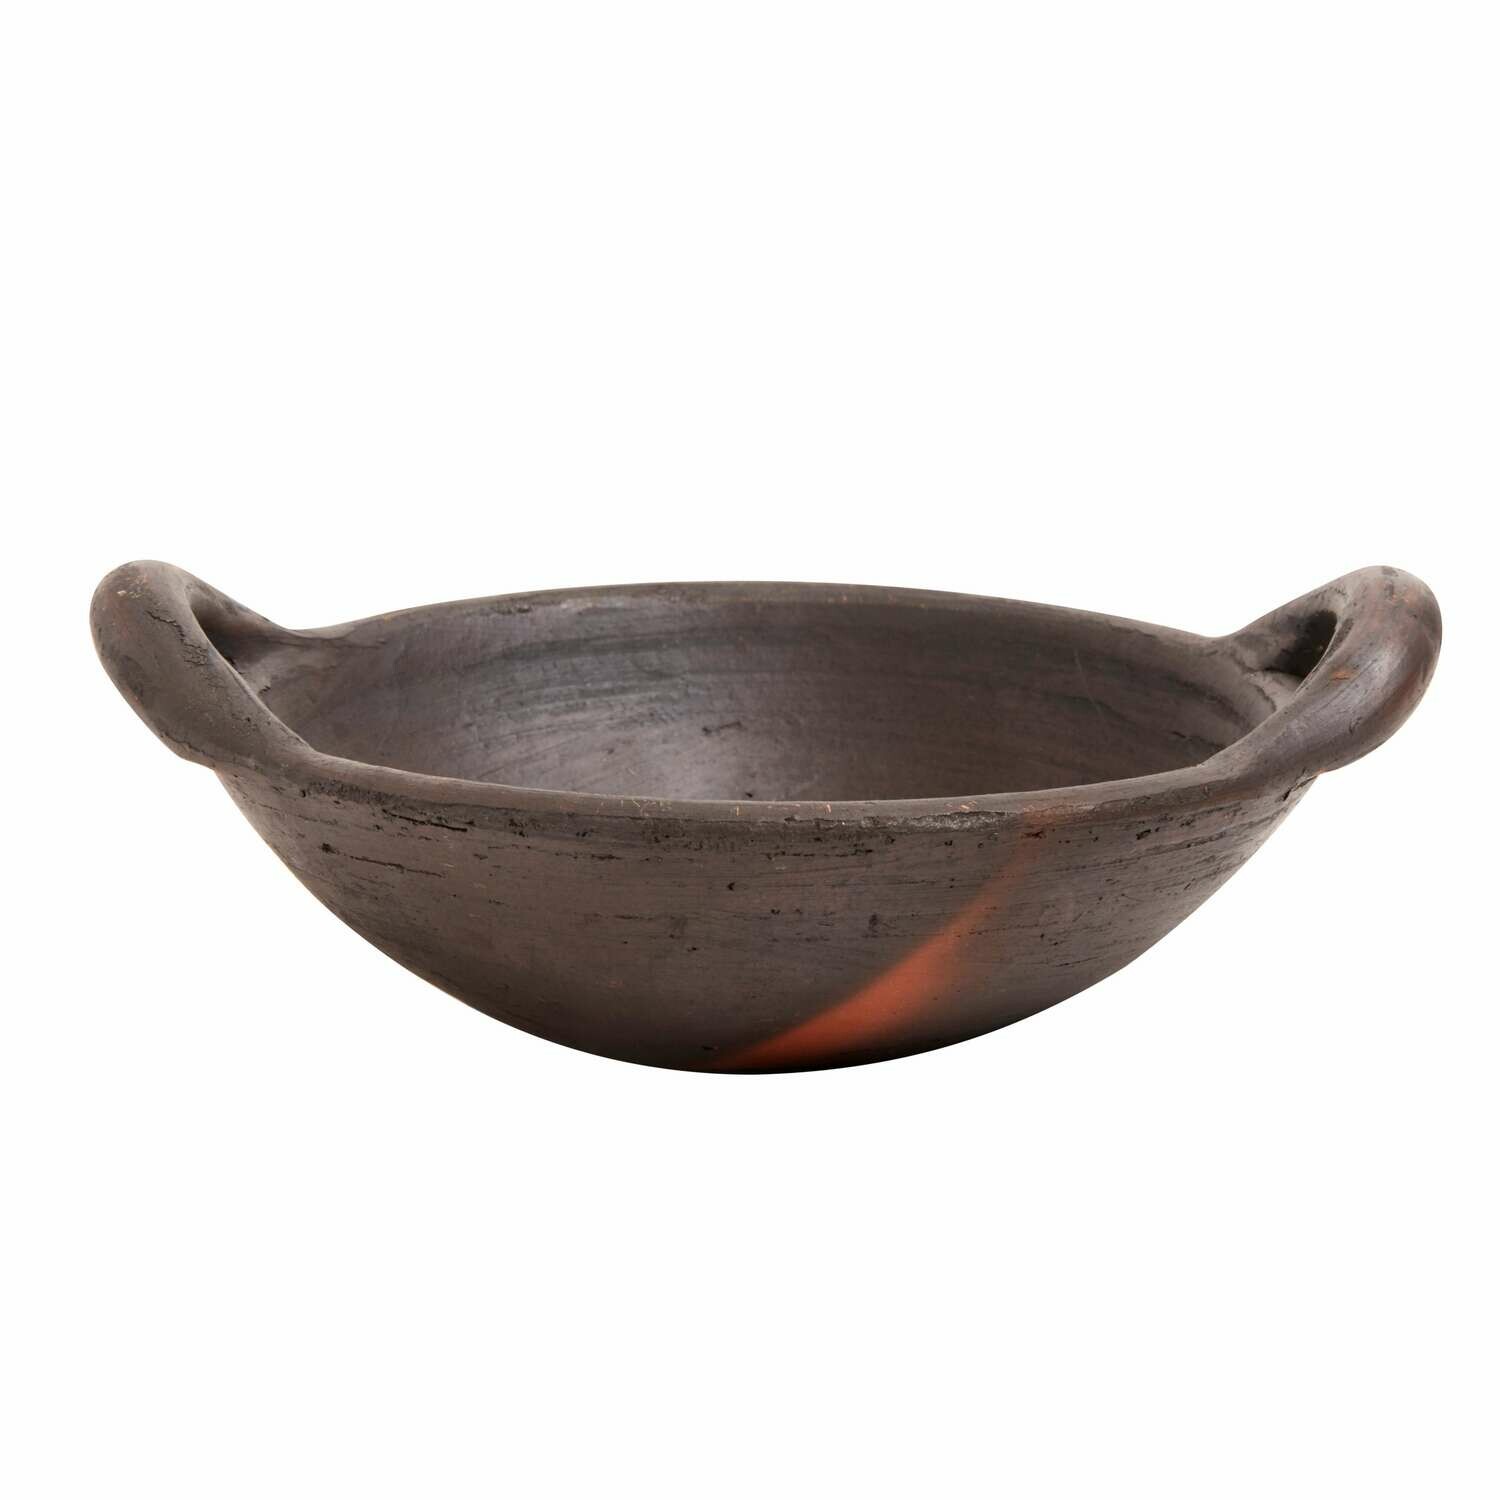 Bowl with handles